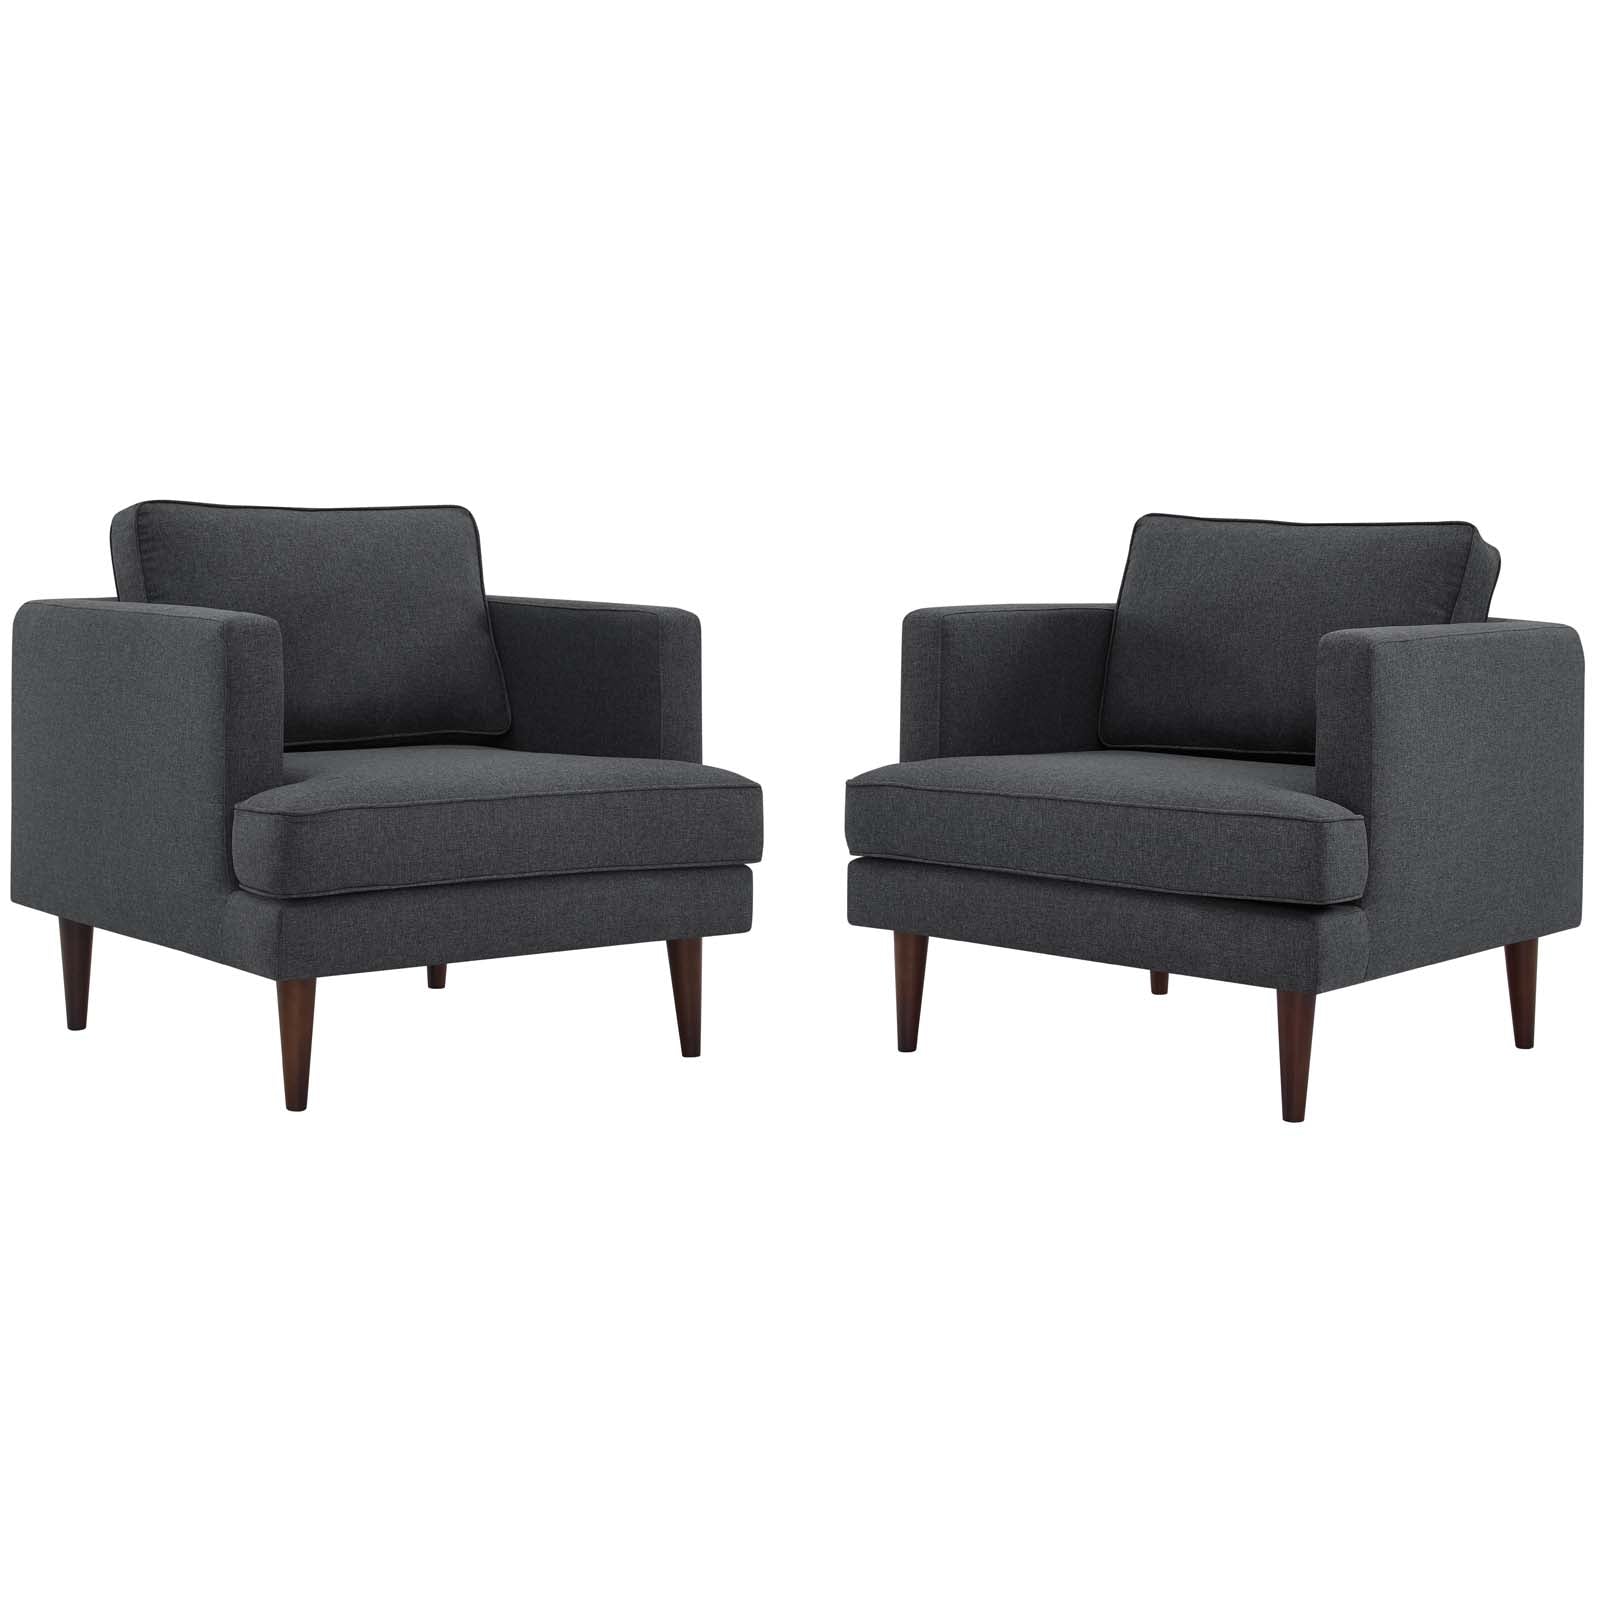 Modway Living Room Sets - Agile Upholstered Fabric Armchair Set of 2 Gray